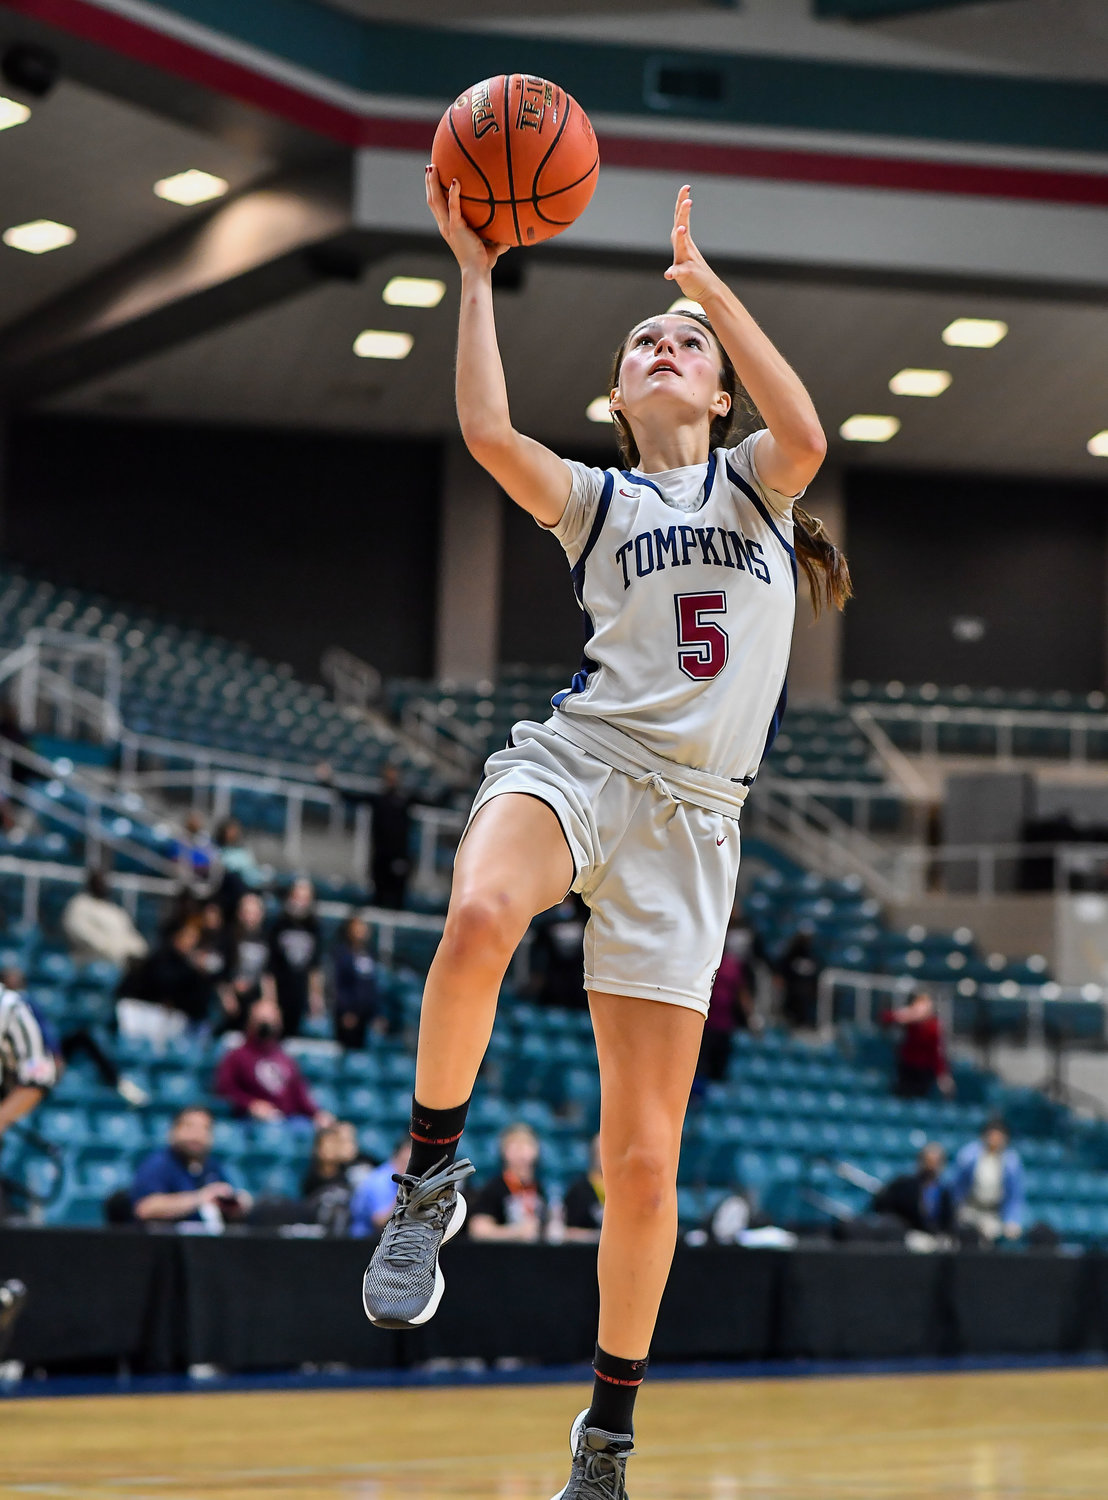 Katy Tx. Feb 15, 2022:  Tompkins Kayla Boven #5 drives to the basket scoring during the Bi-District playoff, Tompkins vs George Ranch. (Photo by Mark Goodman / Katy Times)